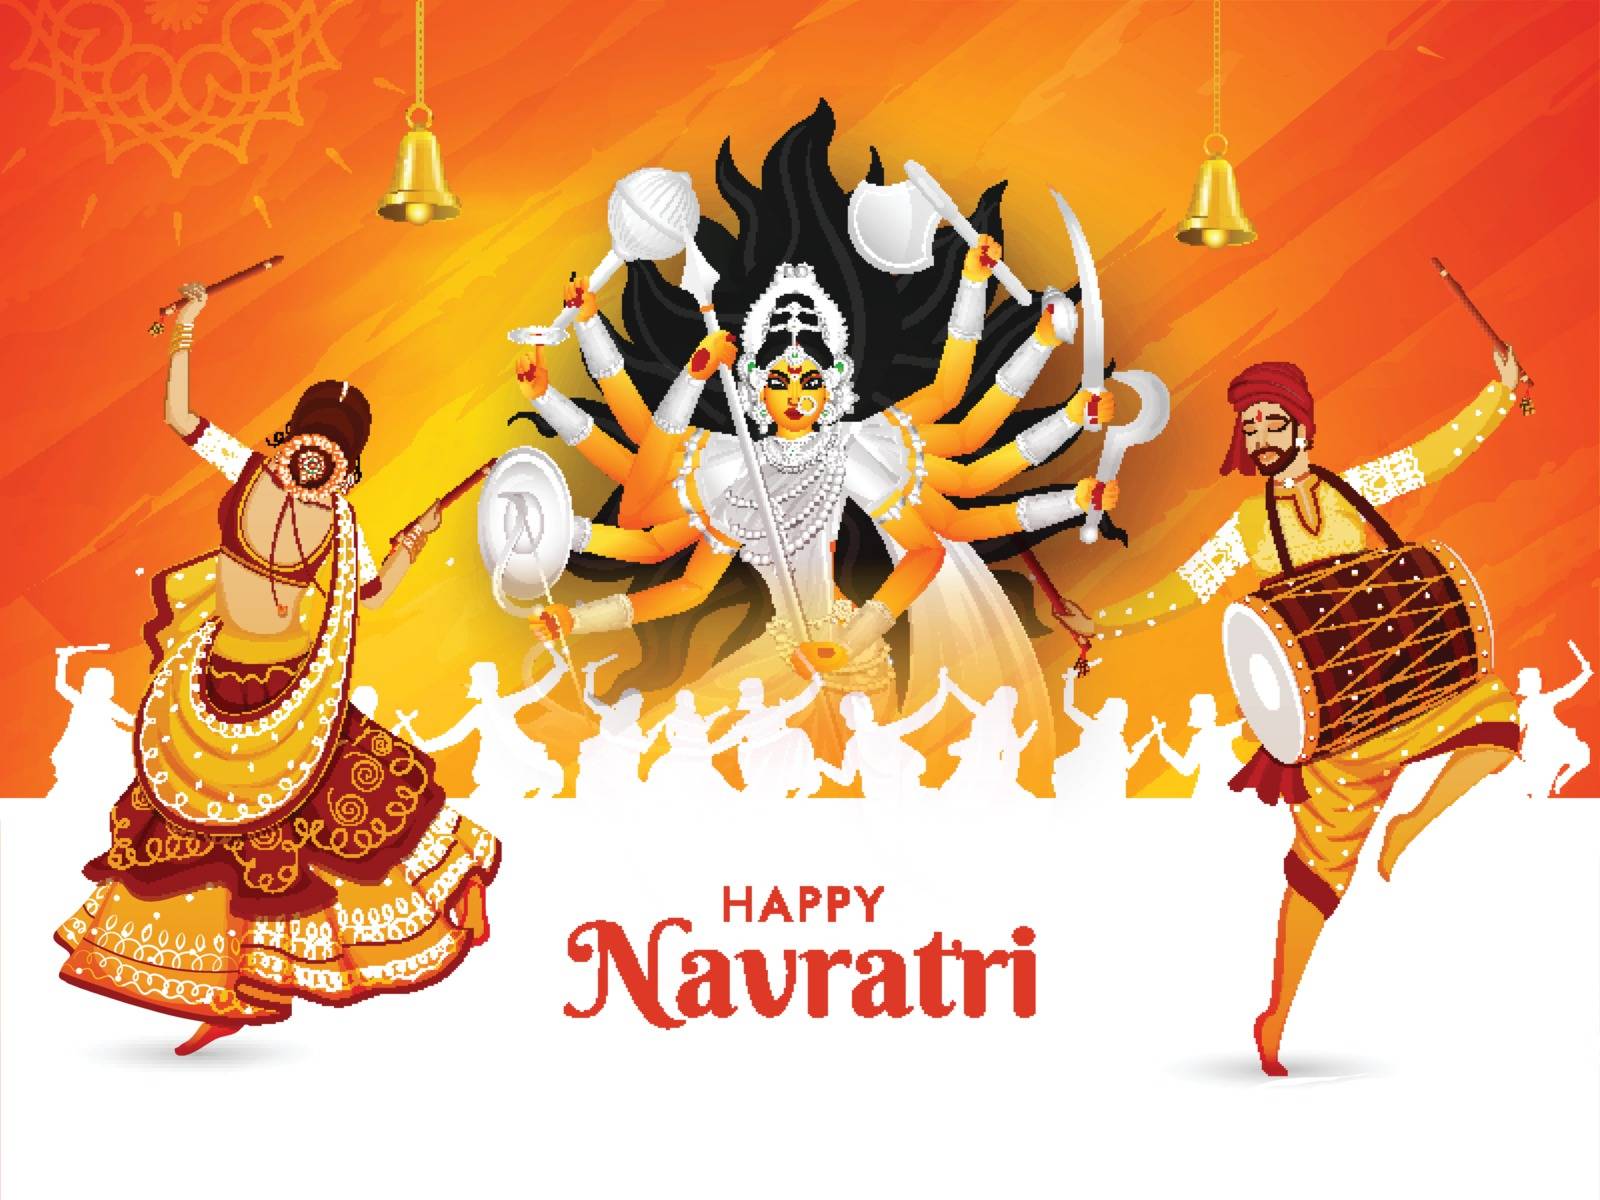 Happy Navratri festival celebration poster or banner design, ill Stock Image  | VectorGrove - Royalty Free Vector Images with commercial license